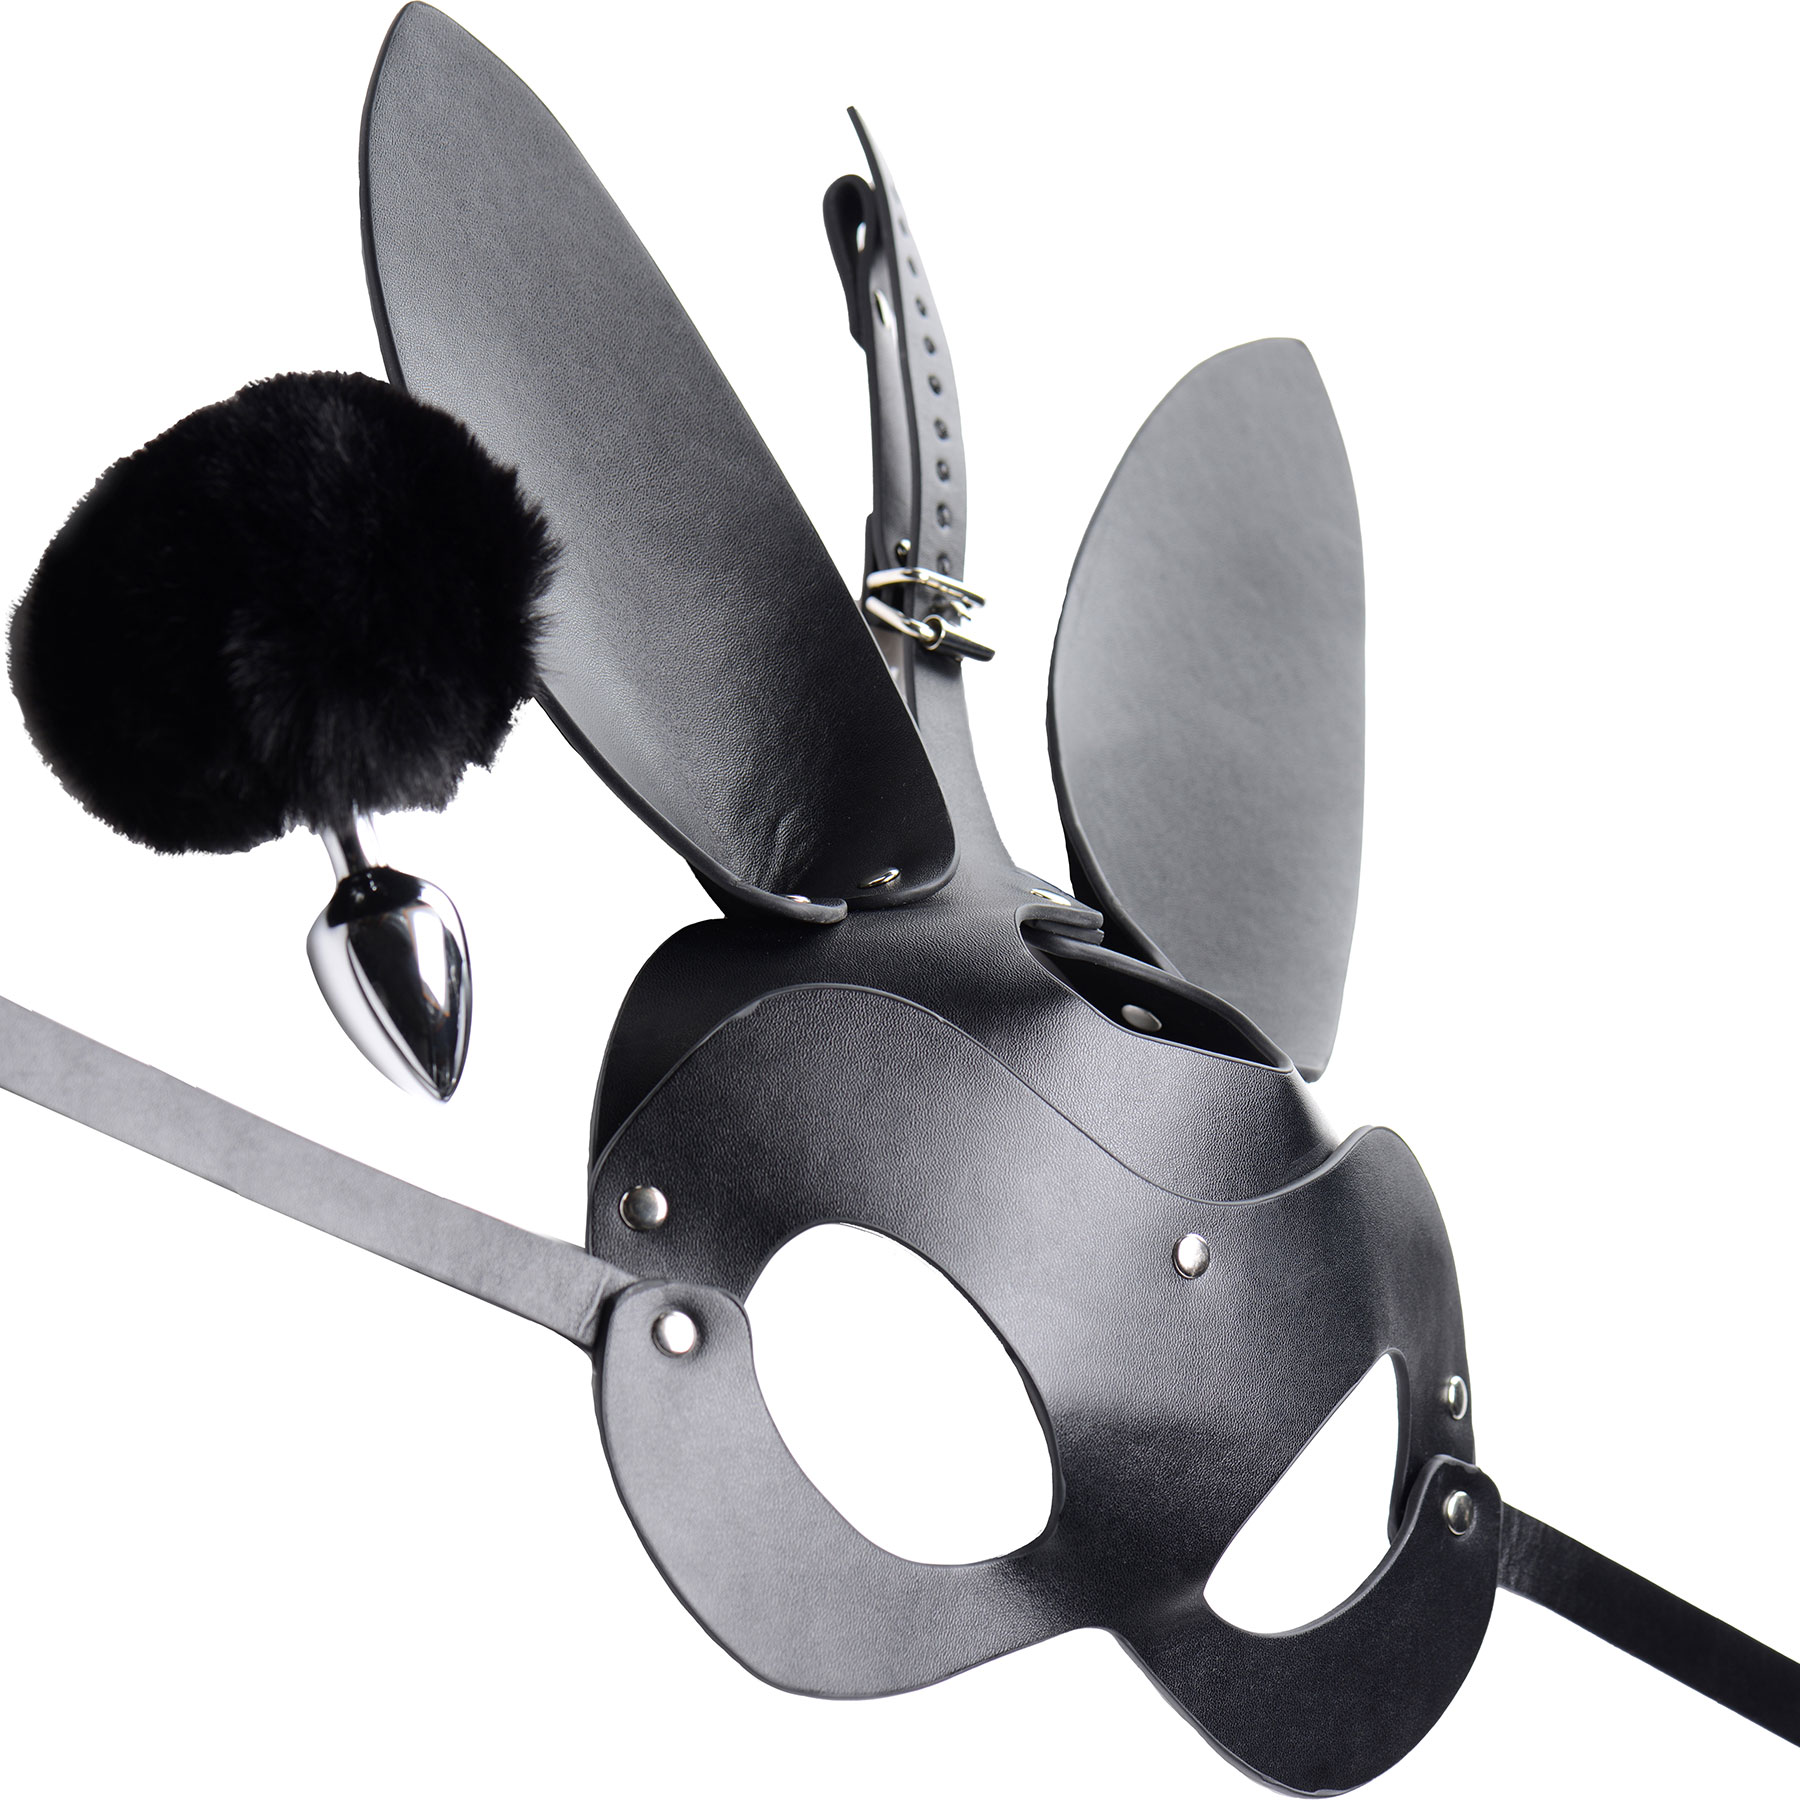 Tailz Aluminum Alloy Anal Plug With Black Faux Fur Bunny Tail & Matching Bunny Mask